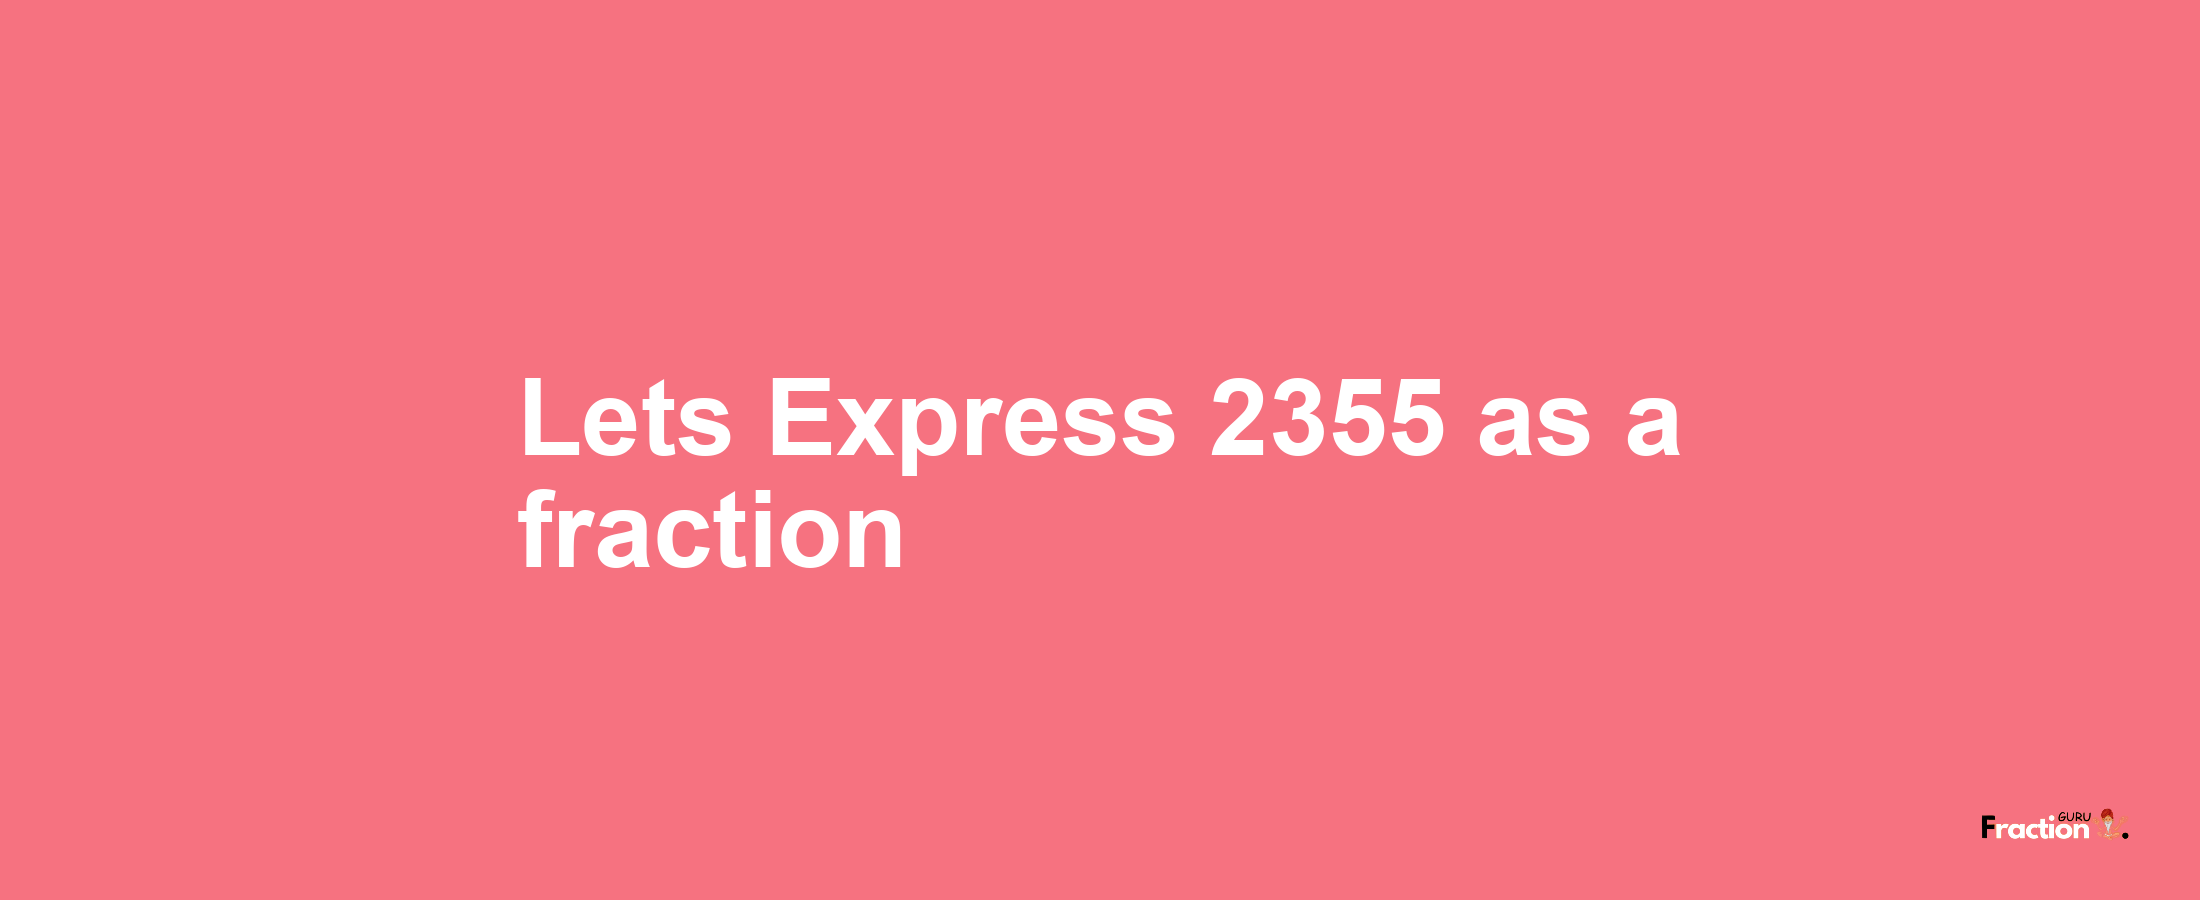 Lets Express 2355 as afraction